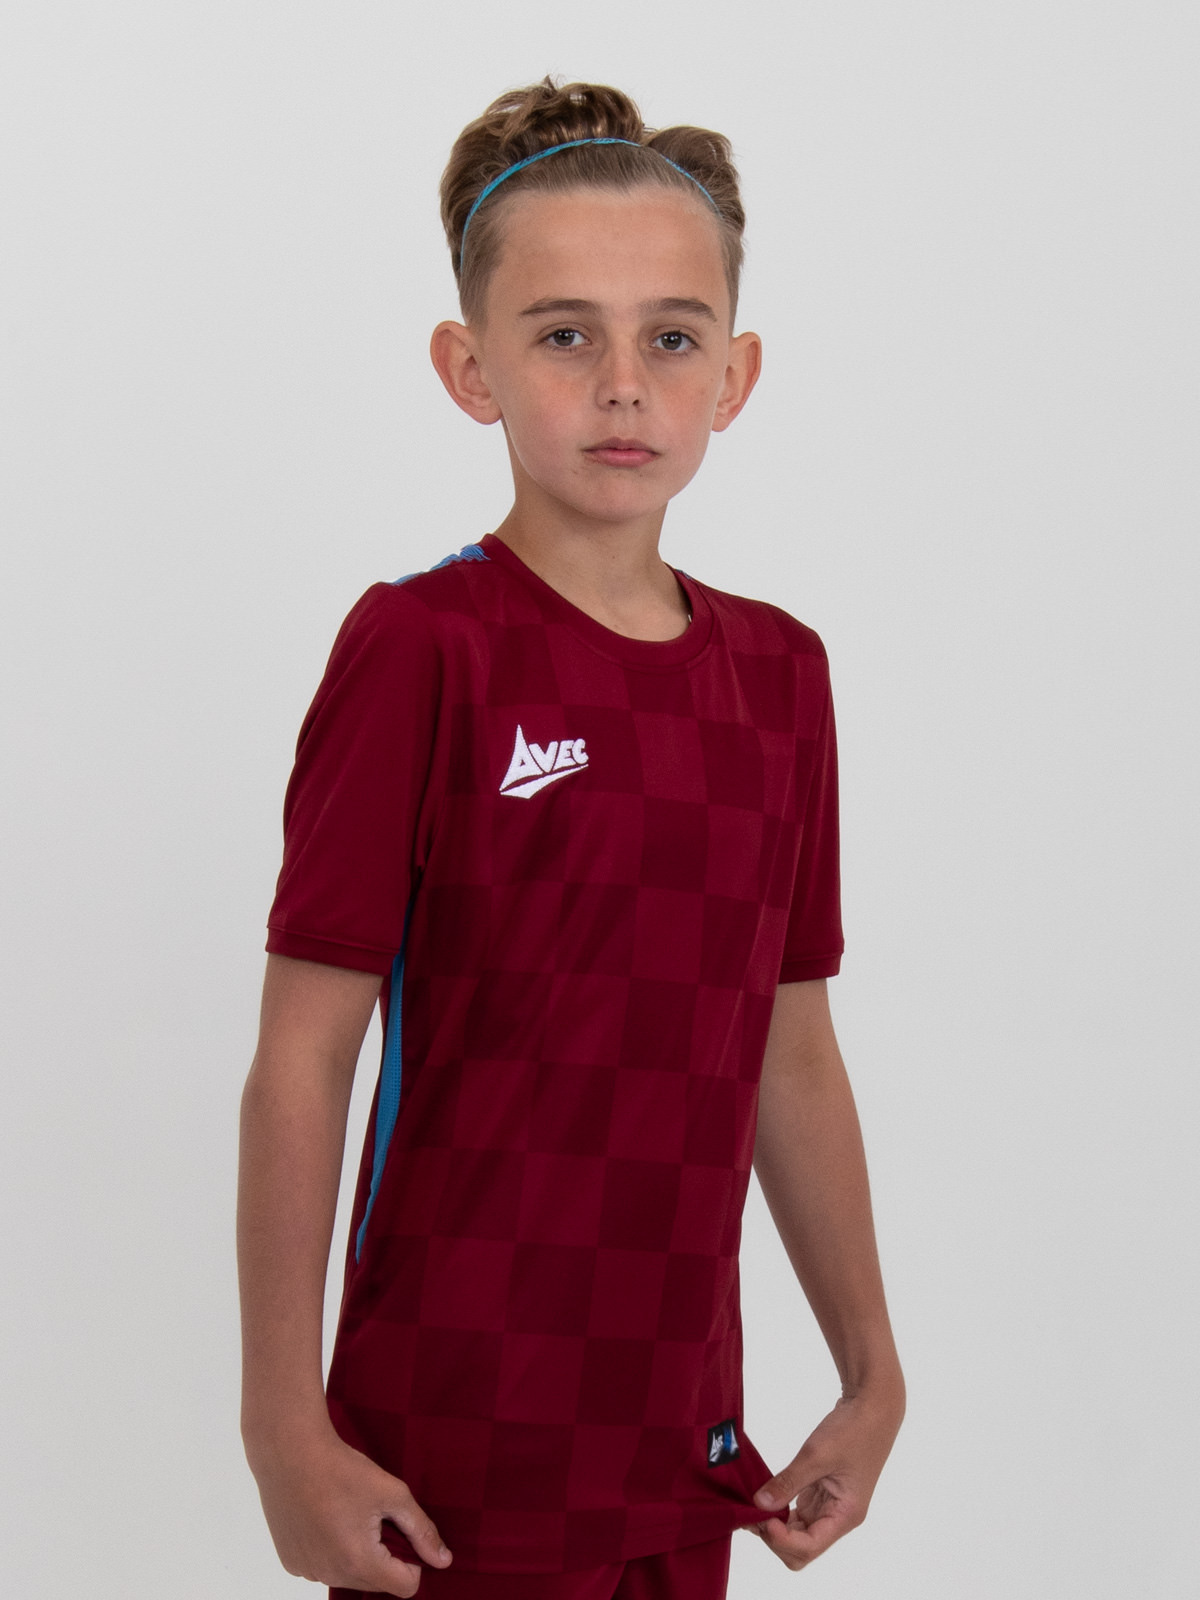 a kid is wearing a claret football shirt with sky blue panels